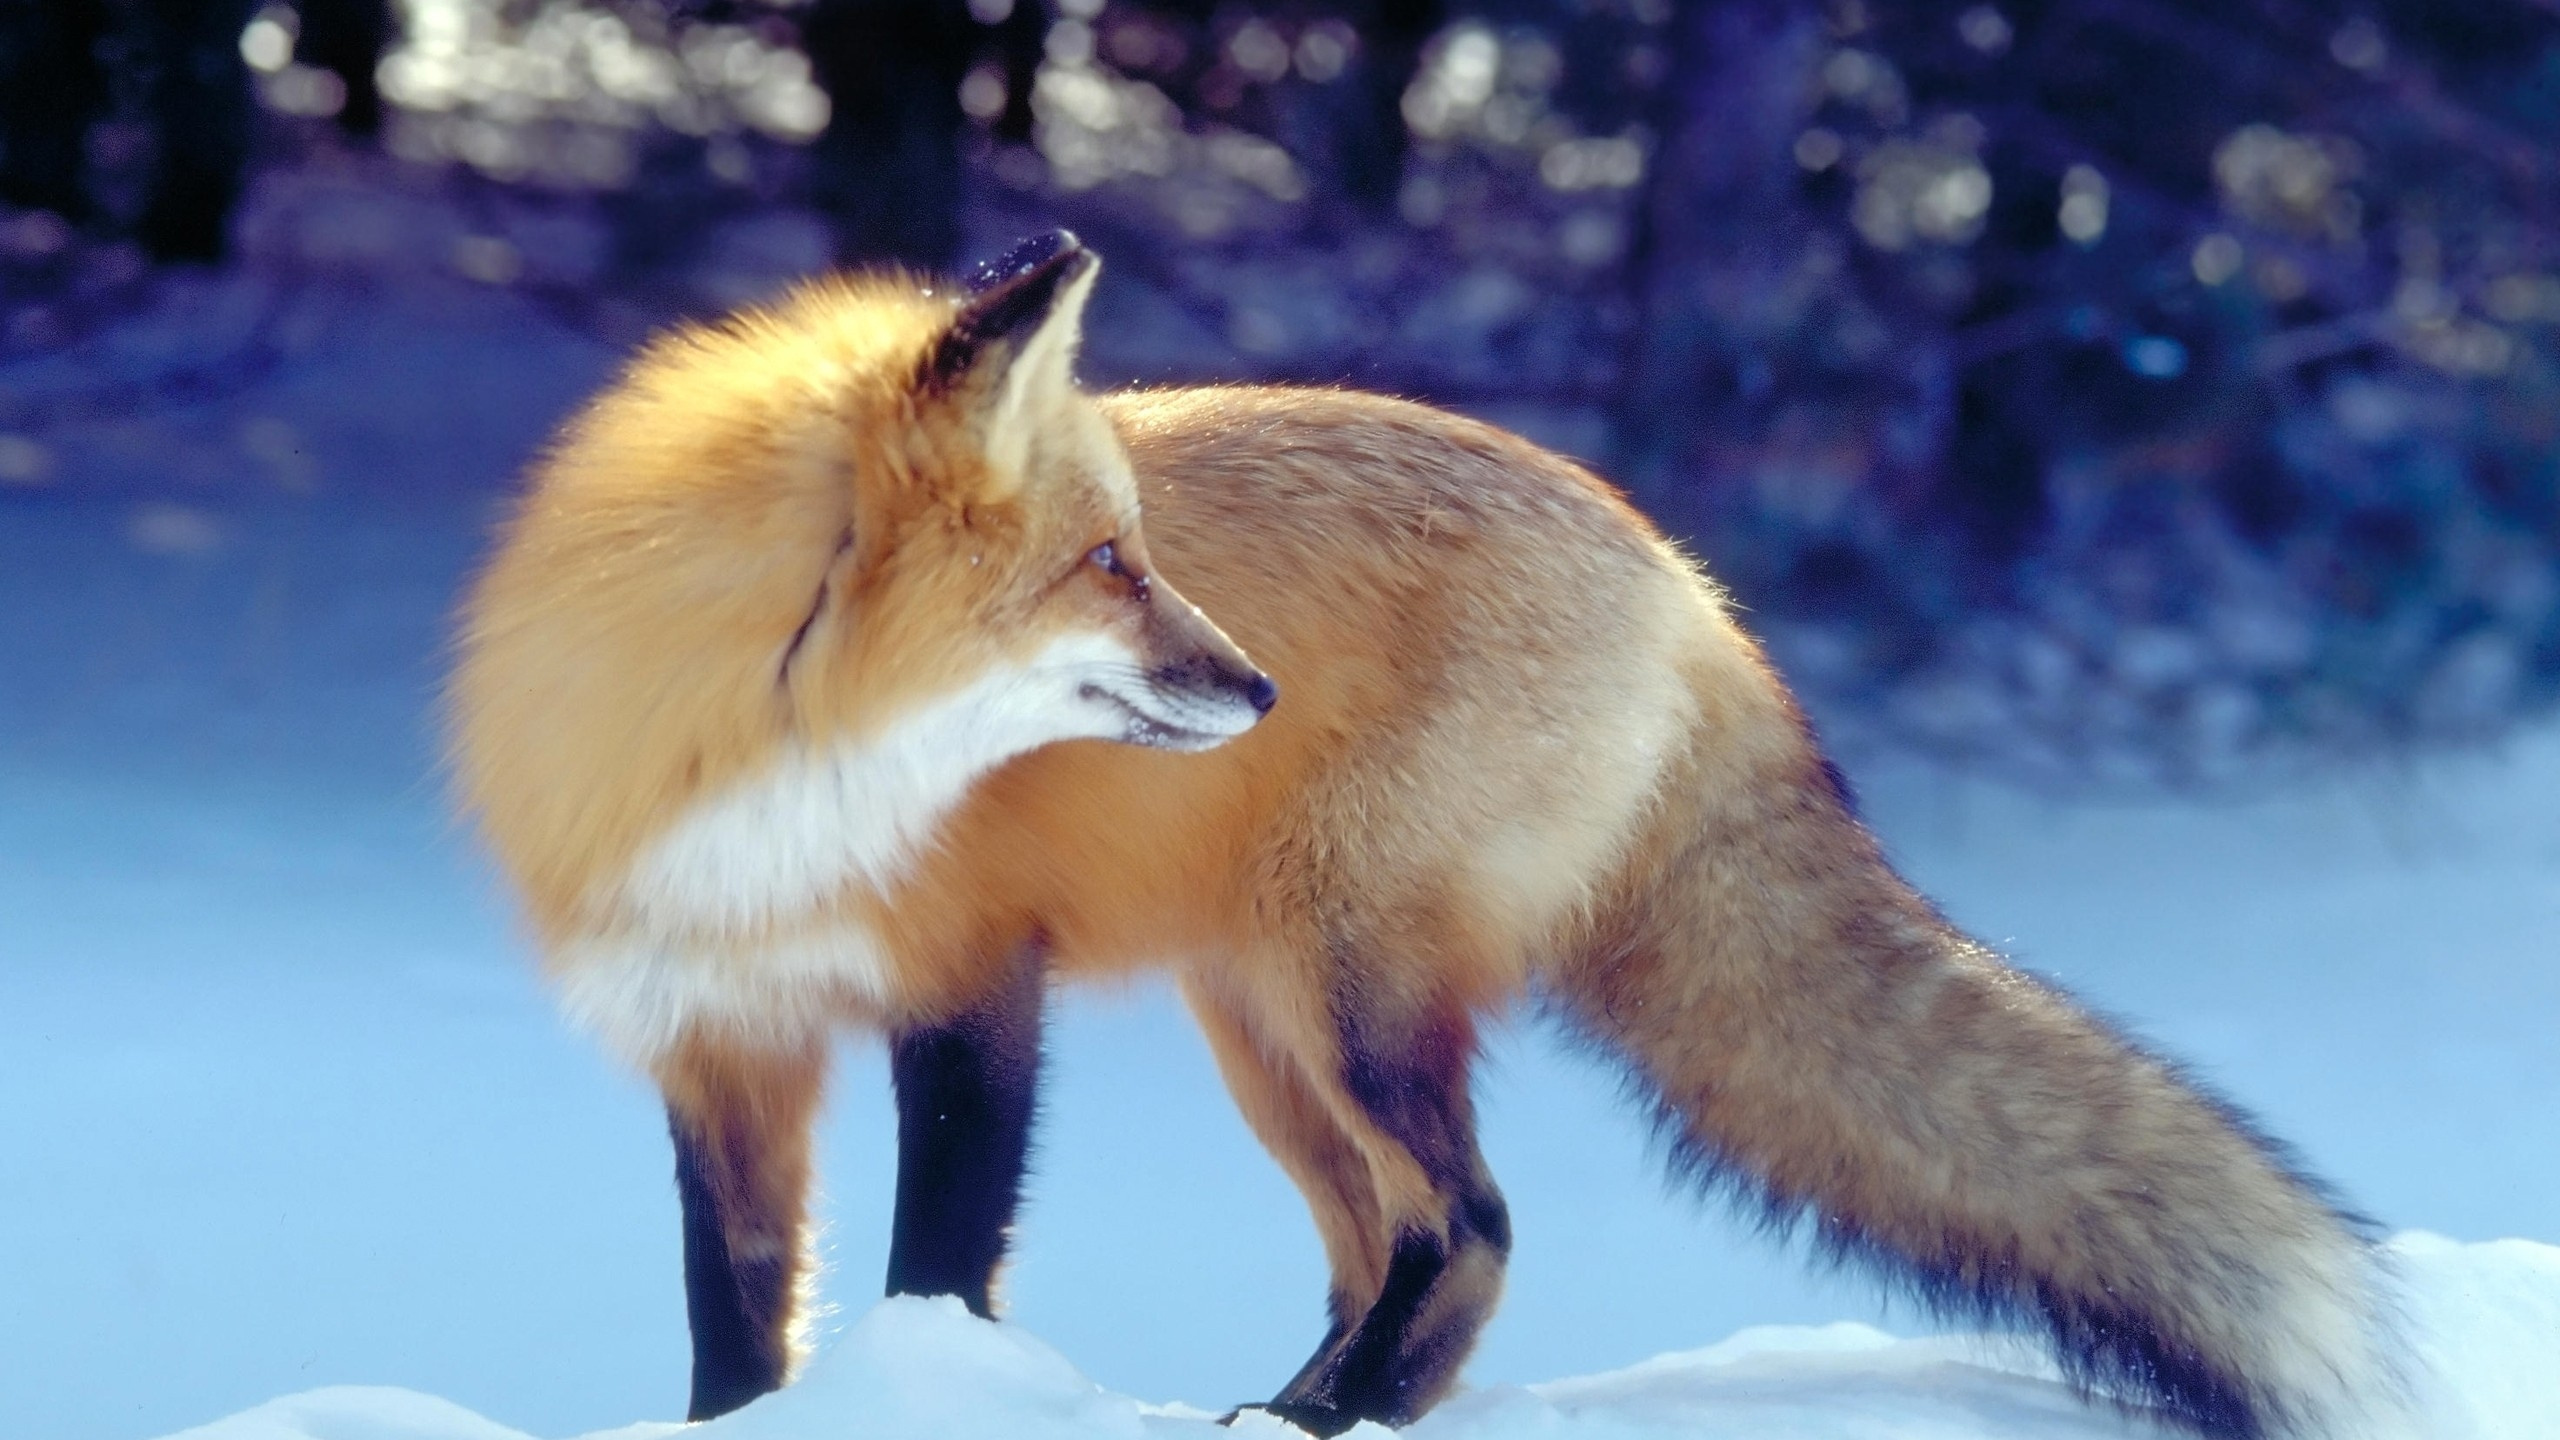 Brown Fox on Snow Covered Ground During Daytime. Wallpaper in 2560x1440 Resolution